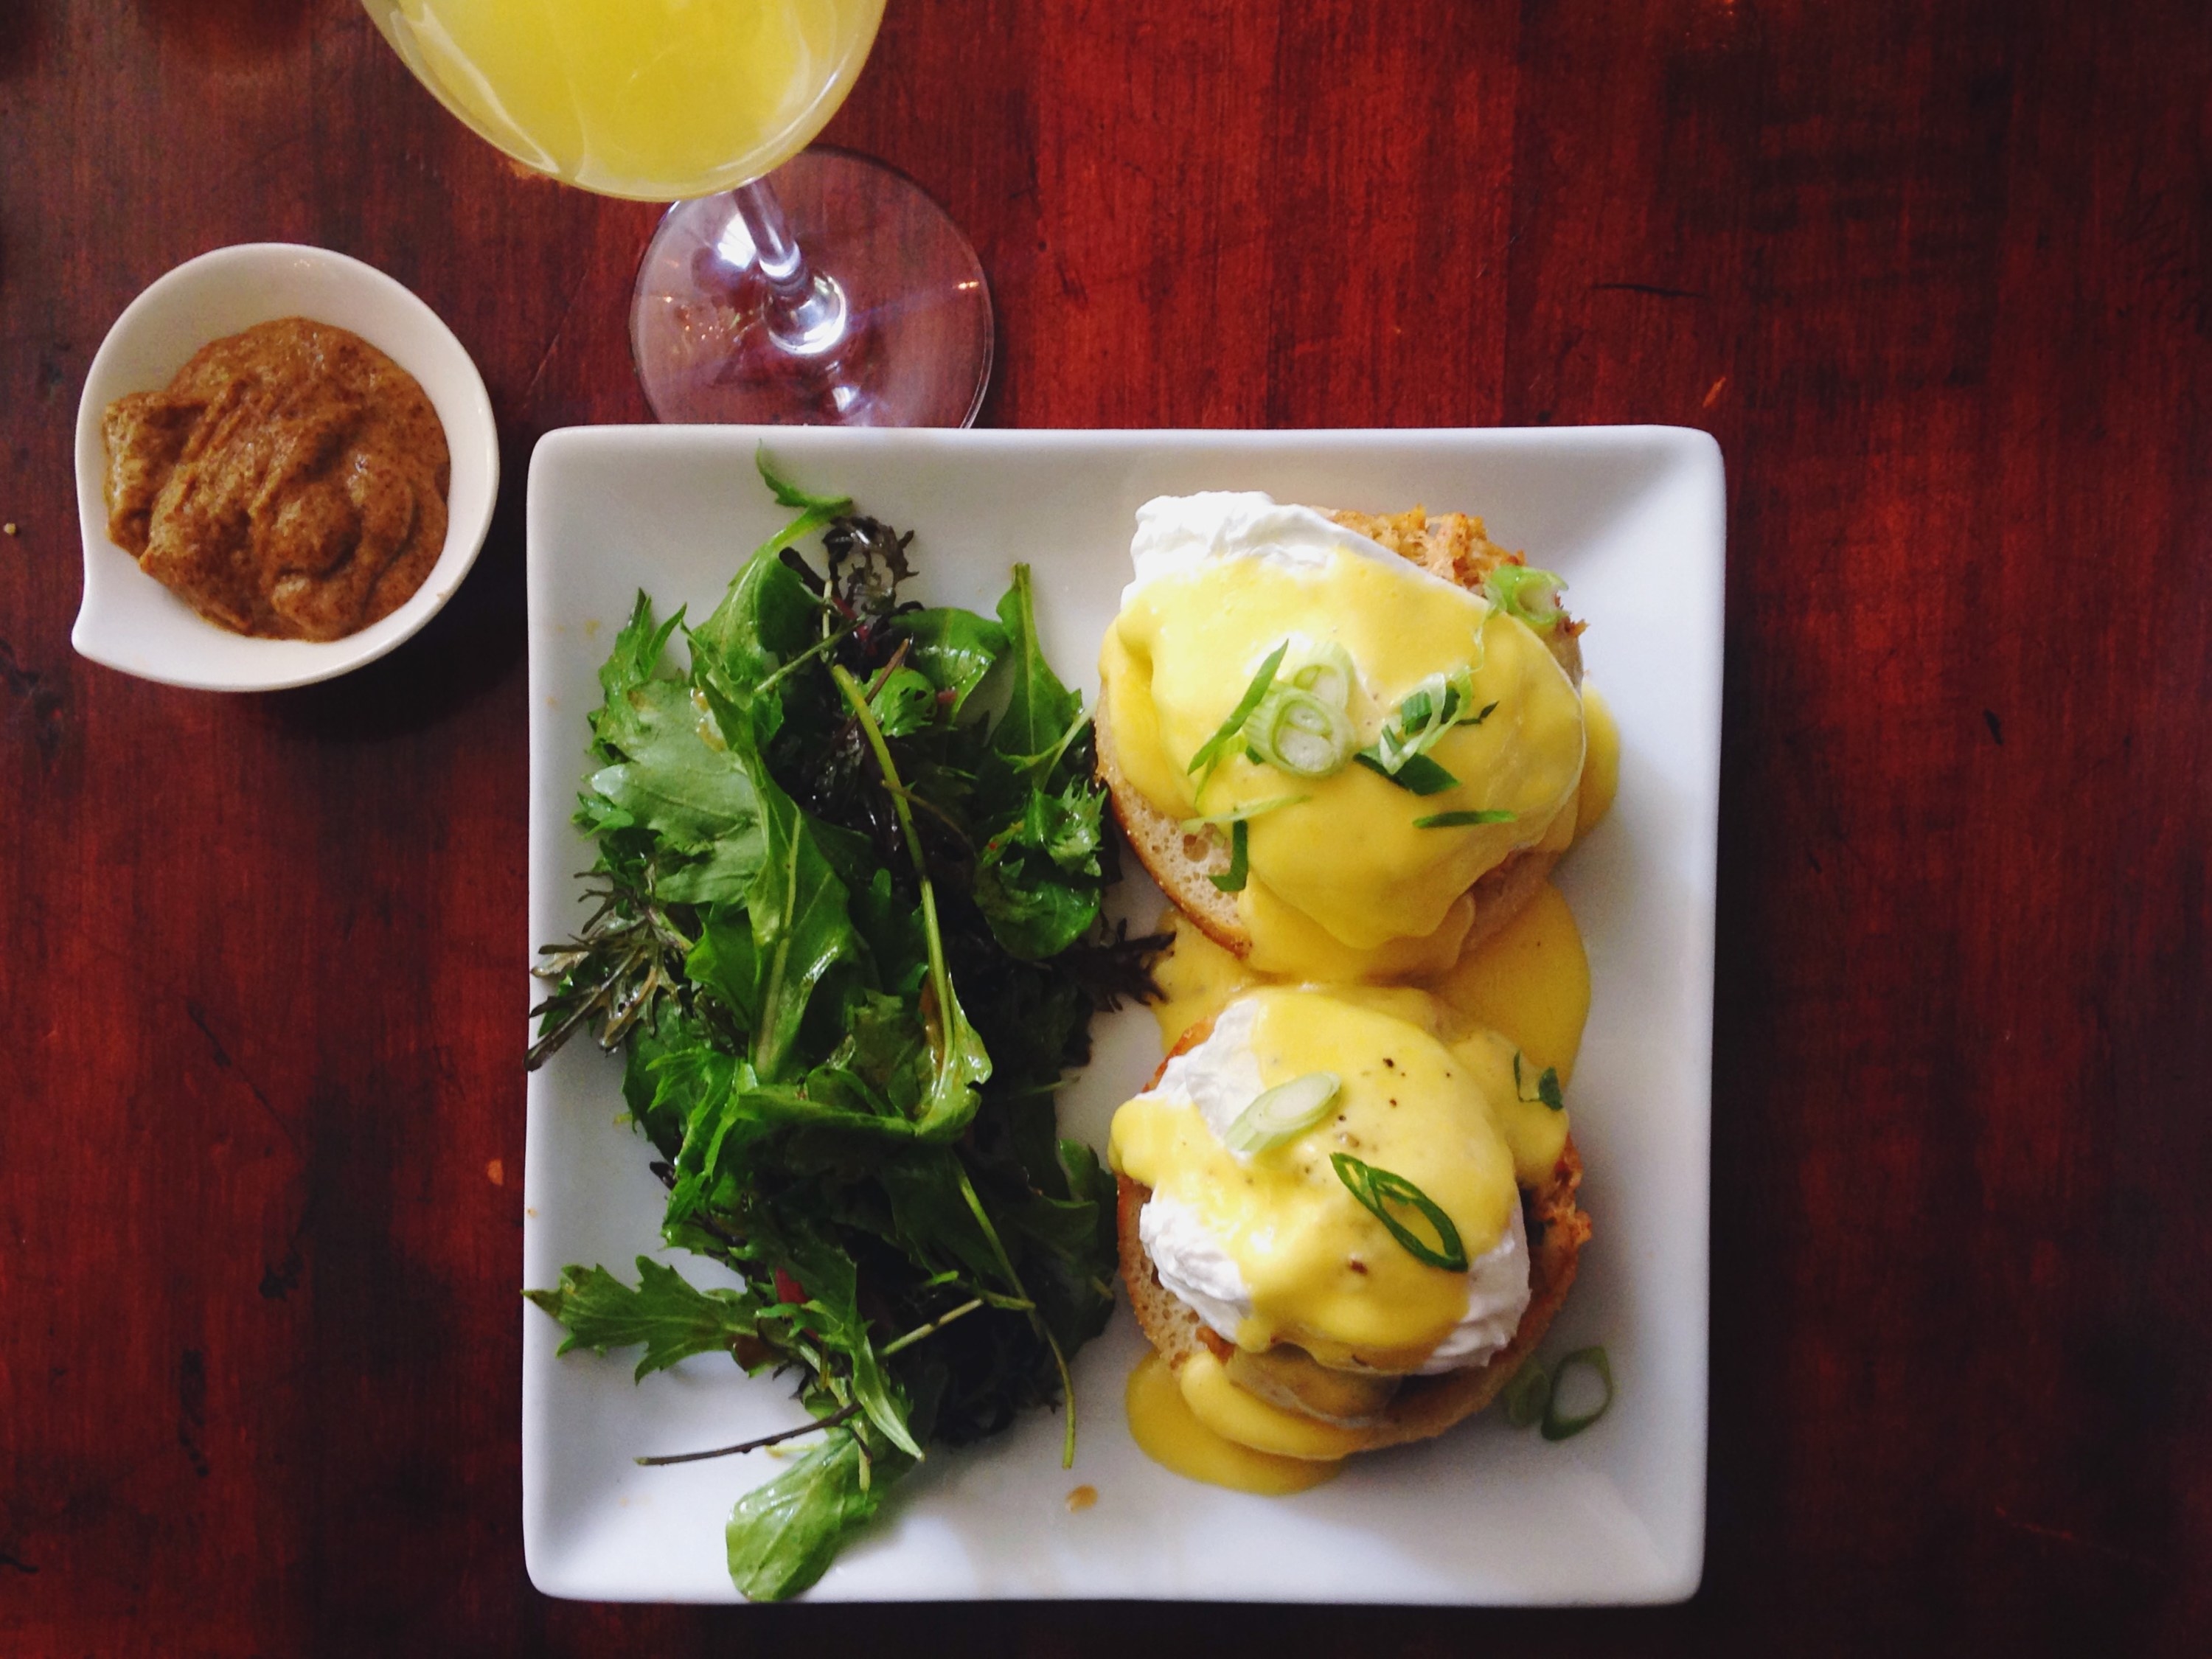 Eggs Benedict on a plate with the eggs over the muffin